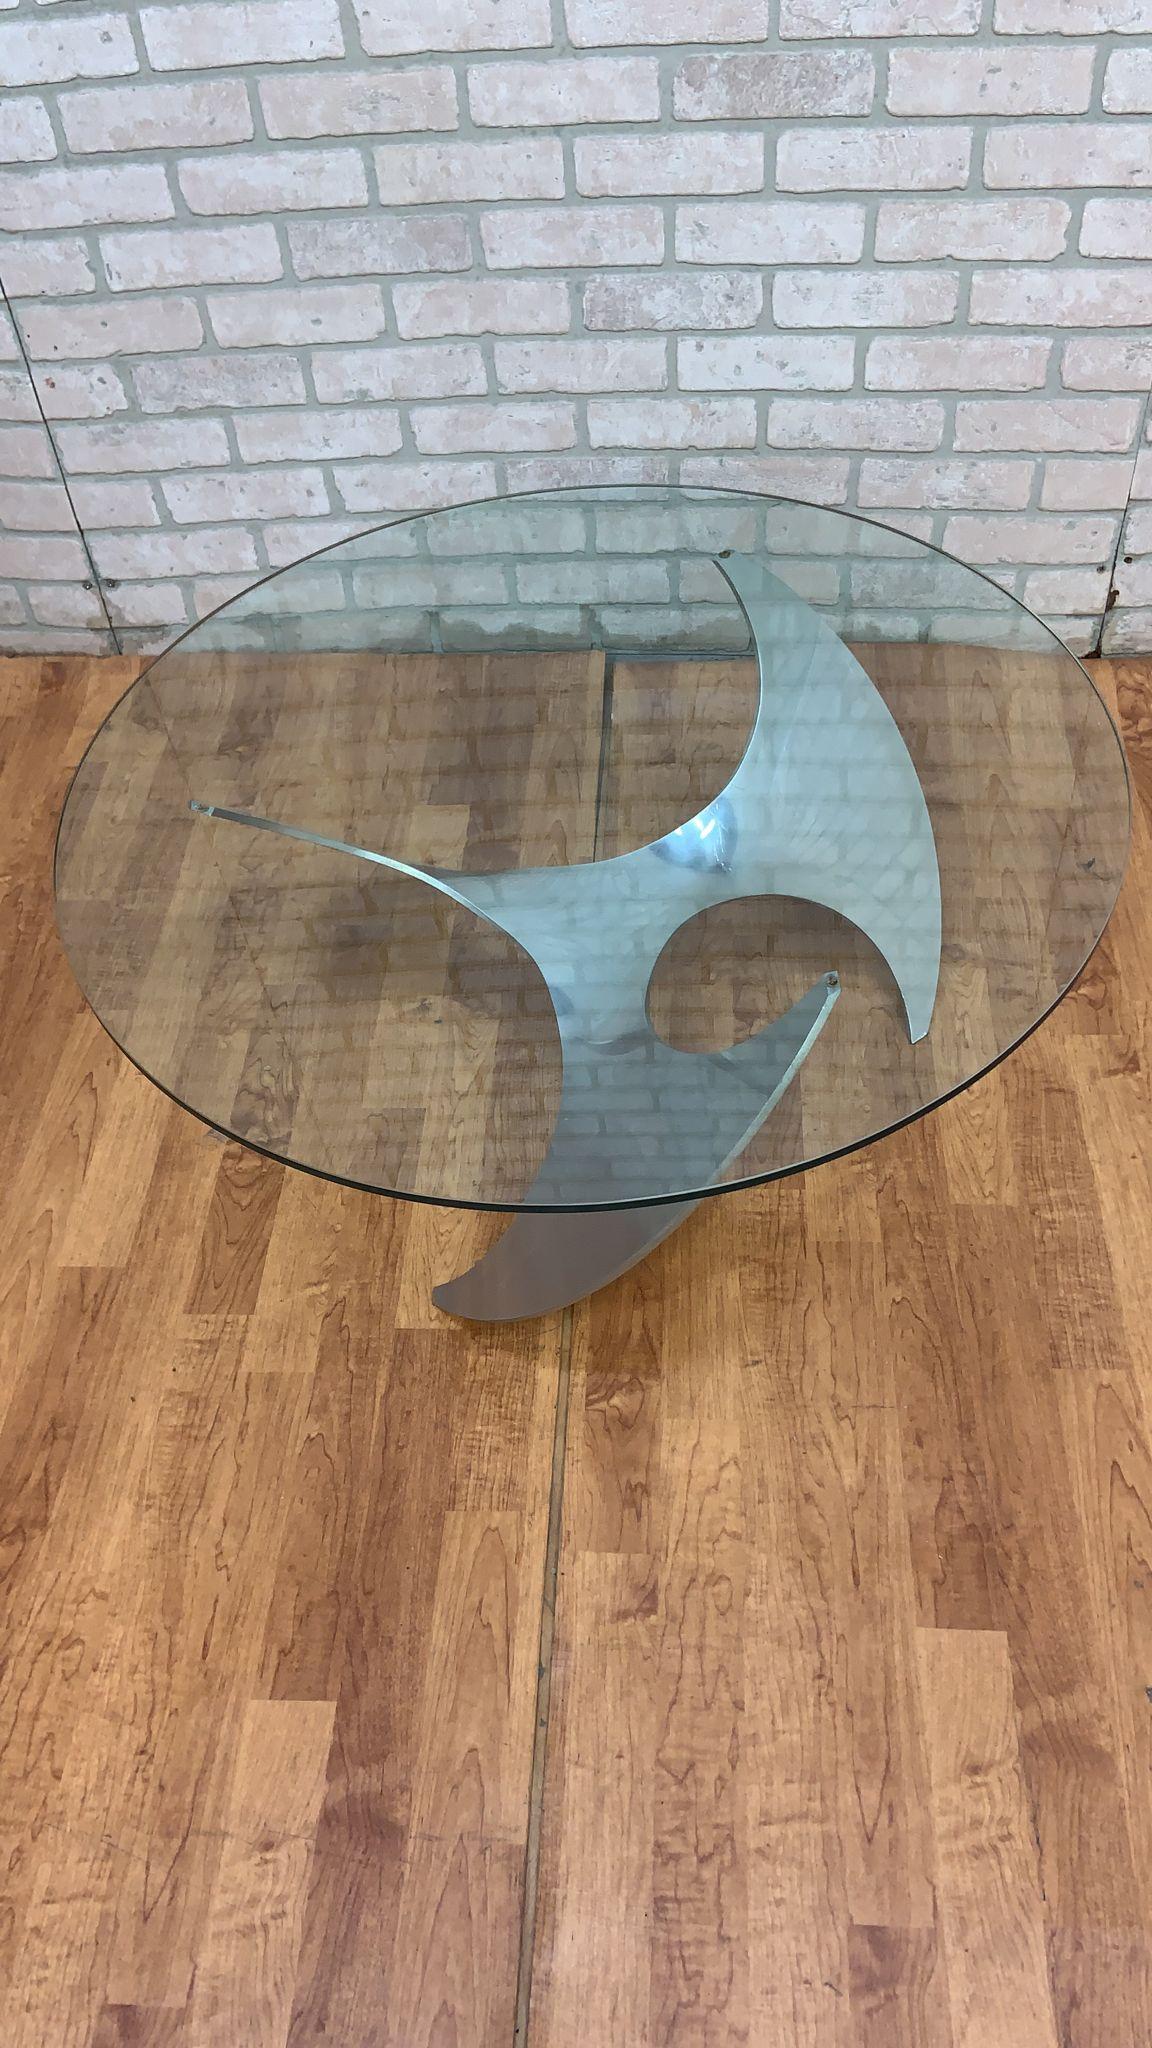 Late 20th Century Vintage Industrial Aluminum Propeller Coffee Table by Knut Hesterberg